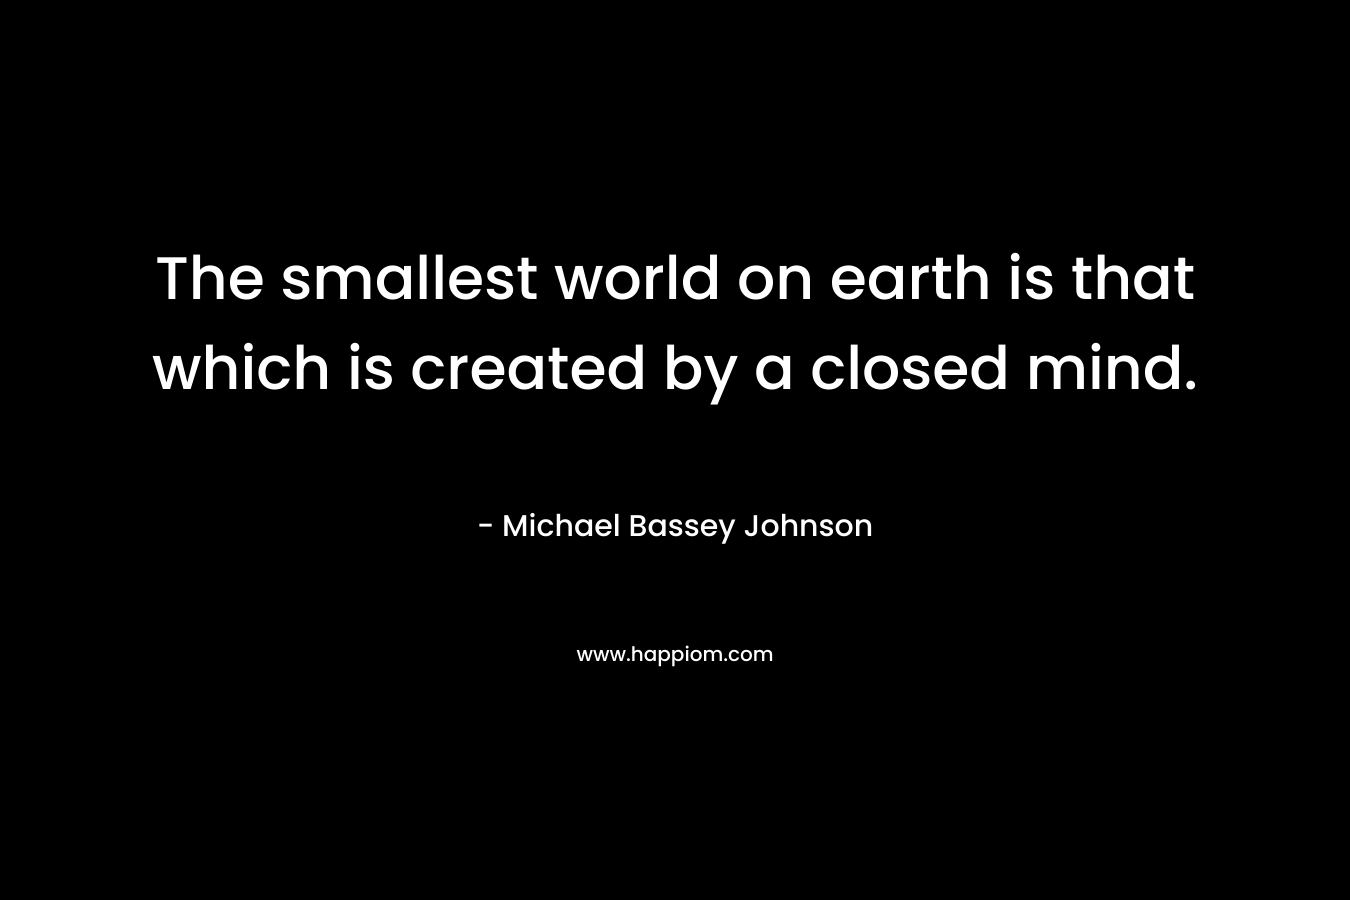 The smallest world on earth is that which is created by a closed mind.